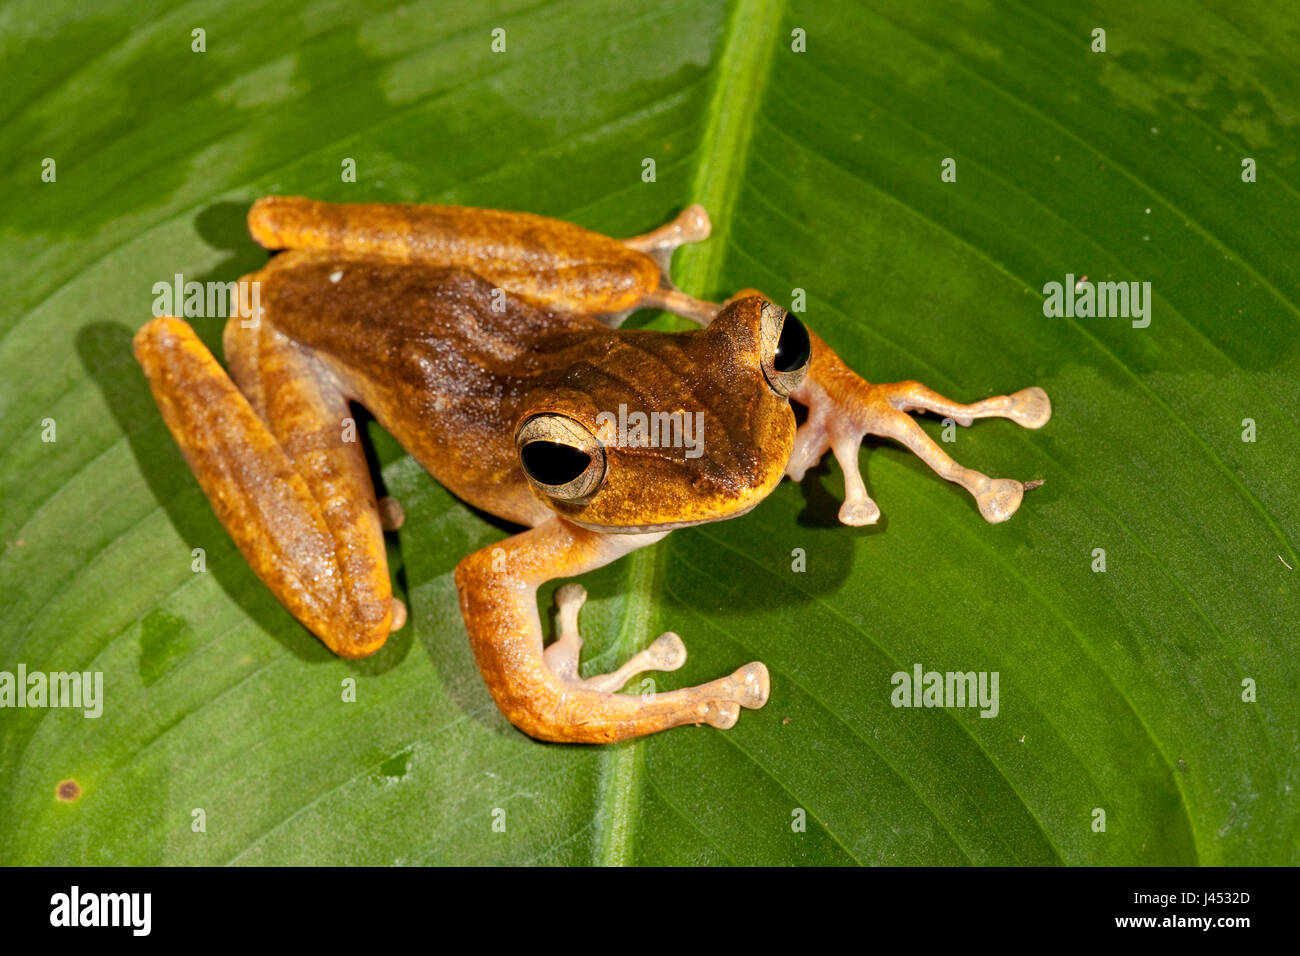 photo of a four-lined tree frog on a green leaf Stock Photo